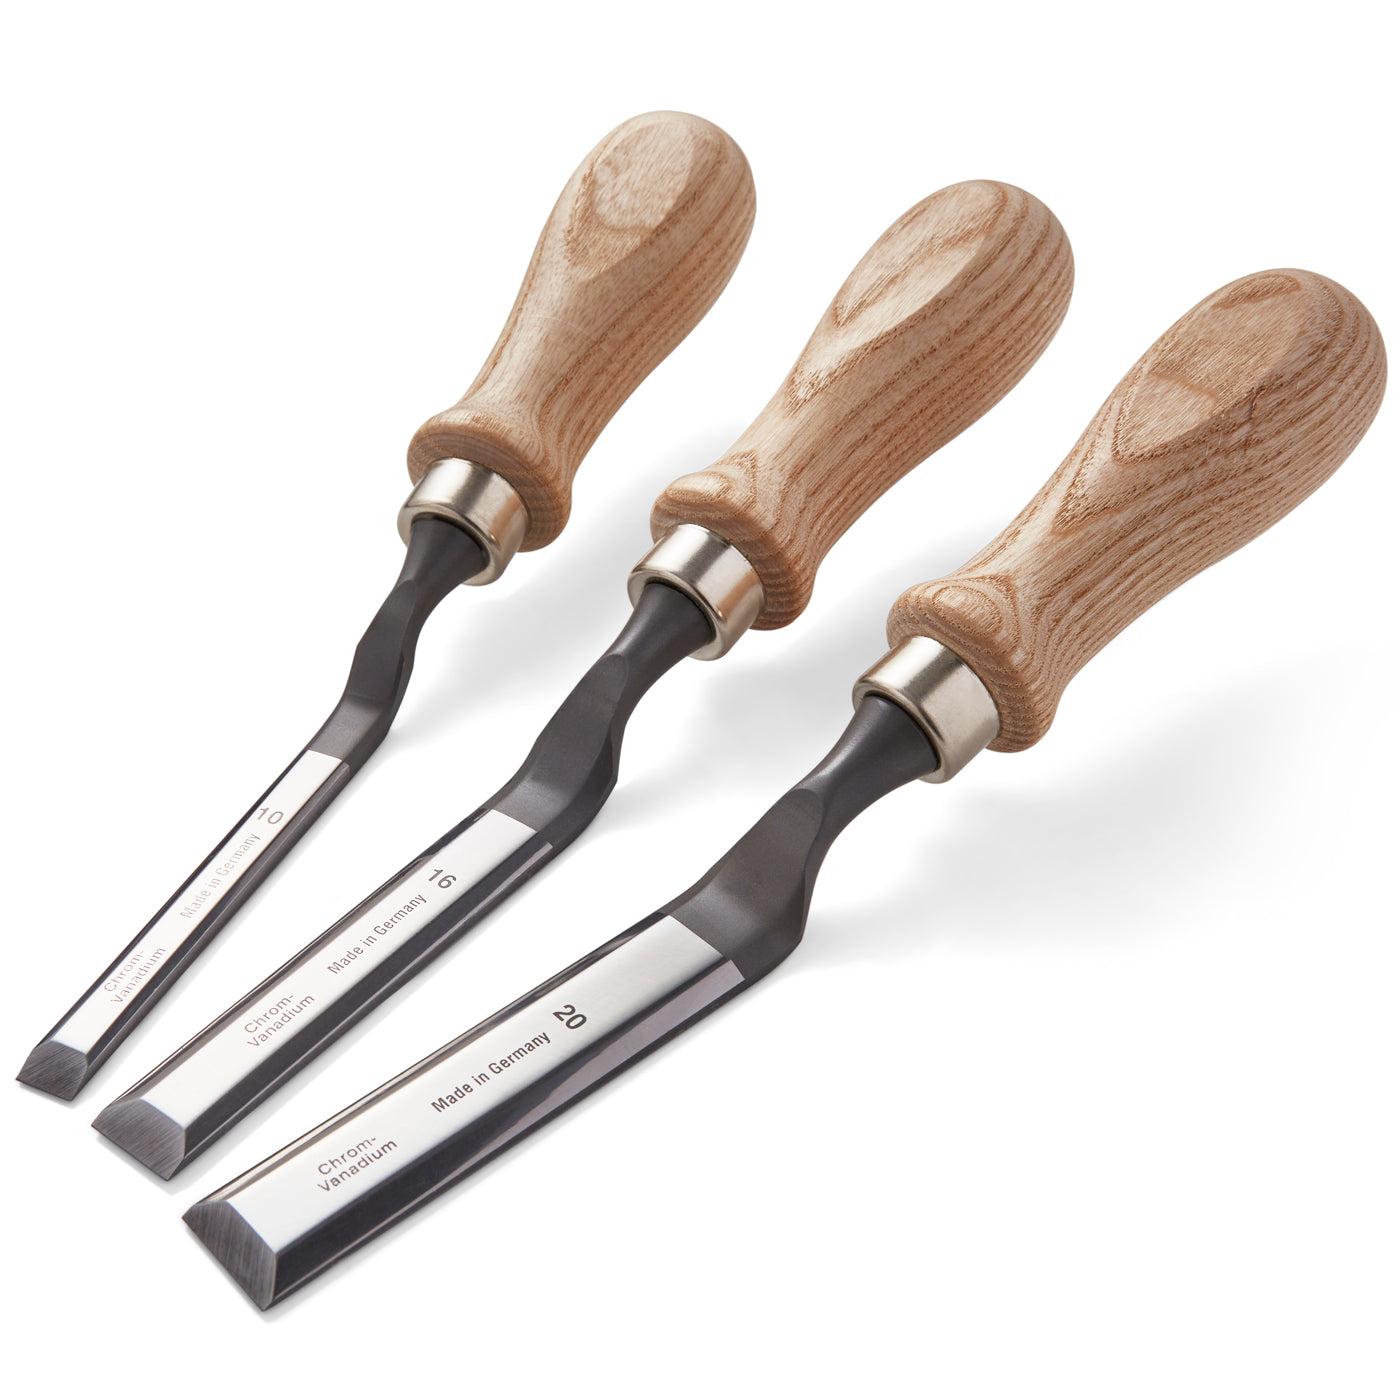 Cranked Pairing Chisels - Set of 3